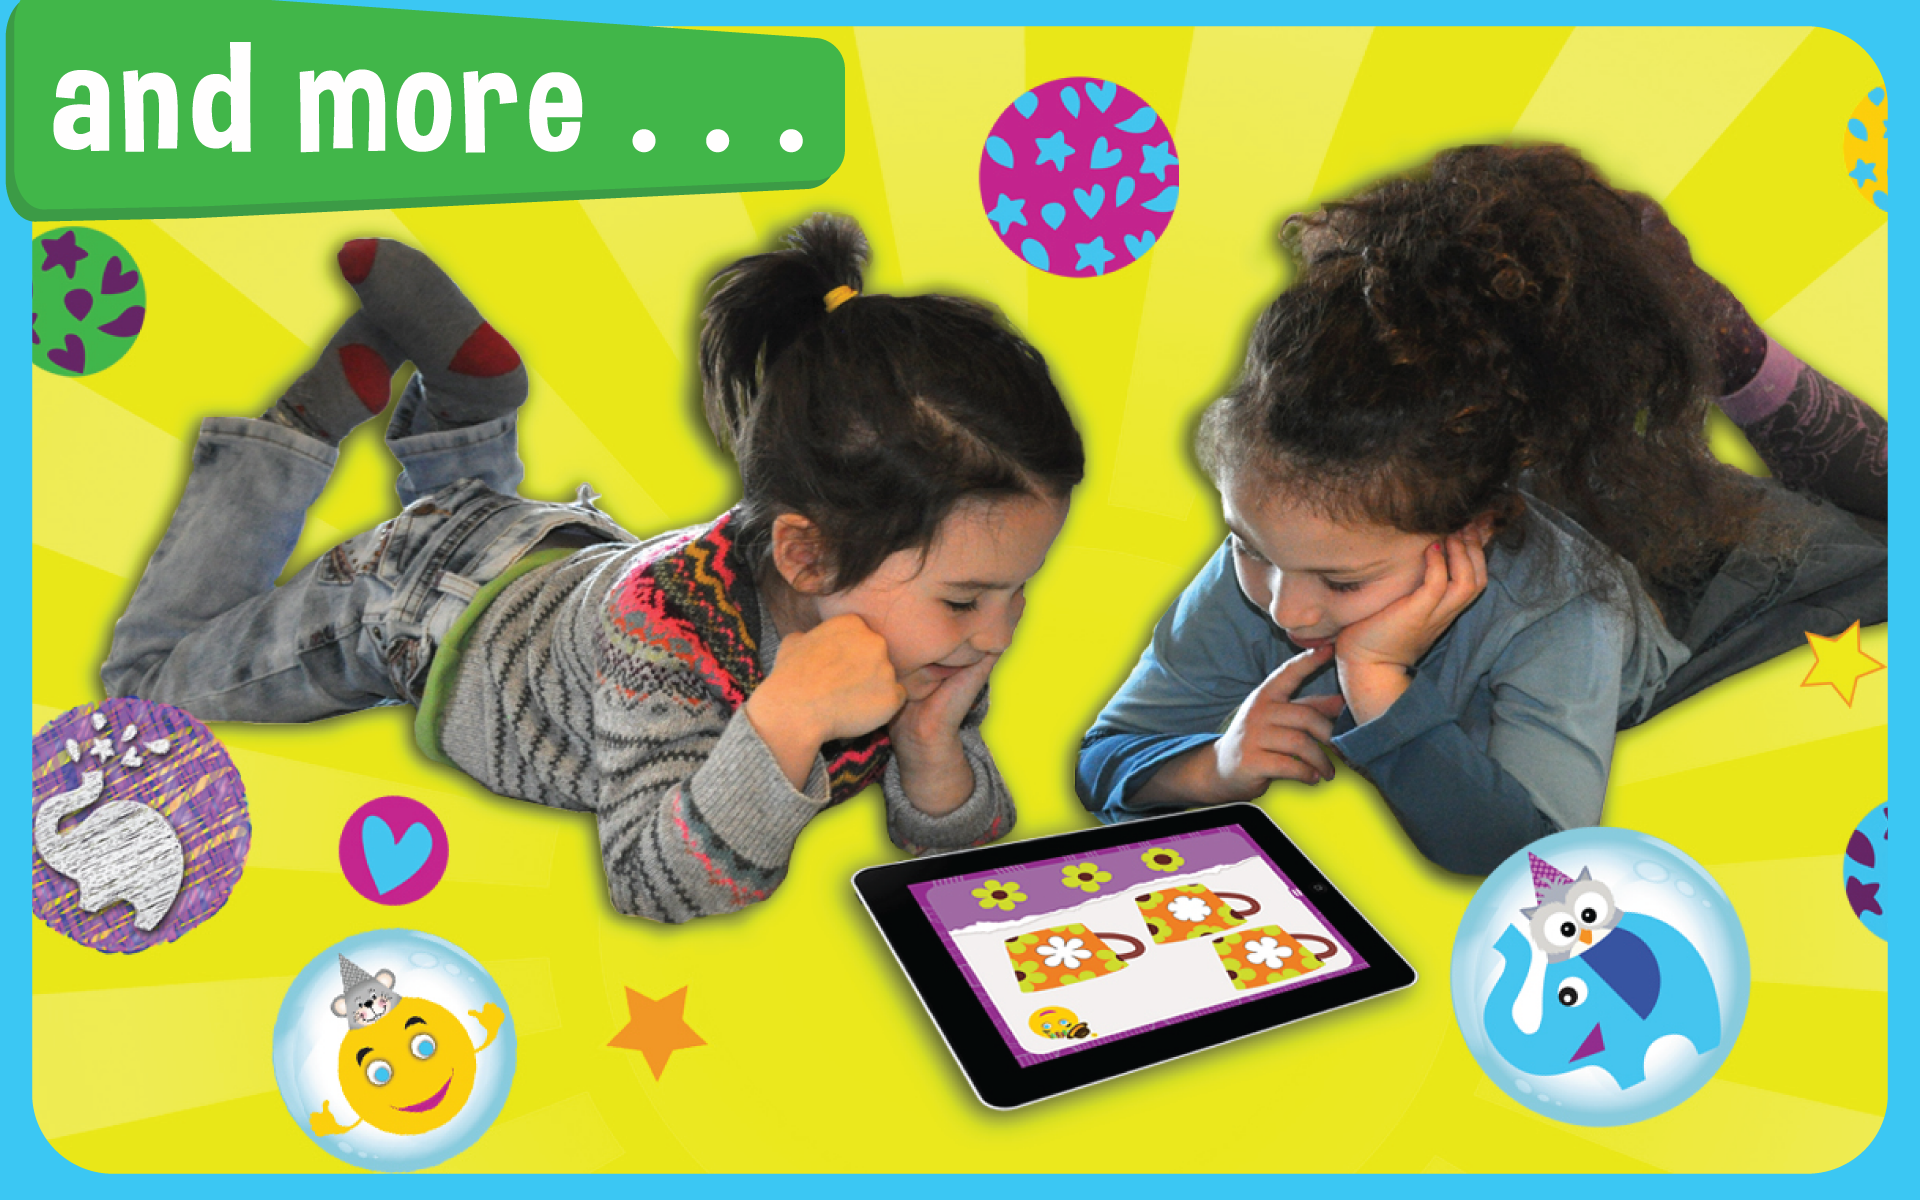 Math & Logic - #1 Adaptive Brain Training for Children, Toddlers and Preschoolers 2 to 8 Years of Age: Education Games, Art Activities and Learning Puzzles